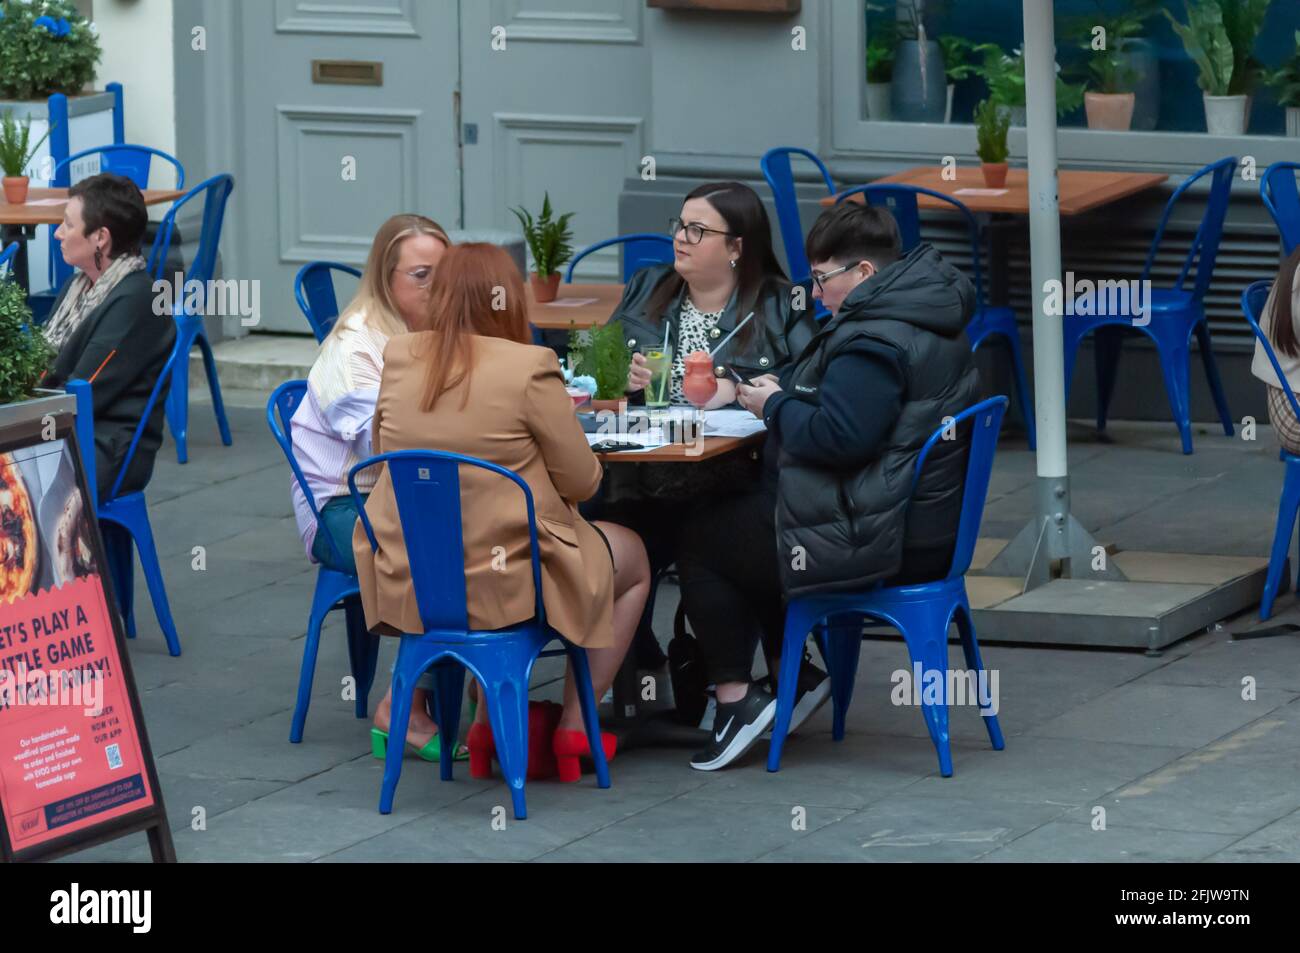 Glasgow, Scotland, UK. 26th April, 2021. People enjoying a drink outside. The lifting of coronavirus restrictions allows cafes, pubs, restaurants and non essential shops to open across Scotland. Credit: Skully/Alamy Live News Stock Photo